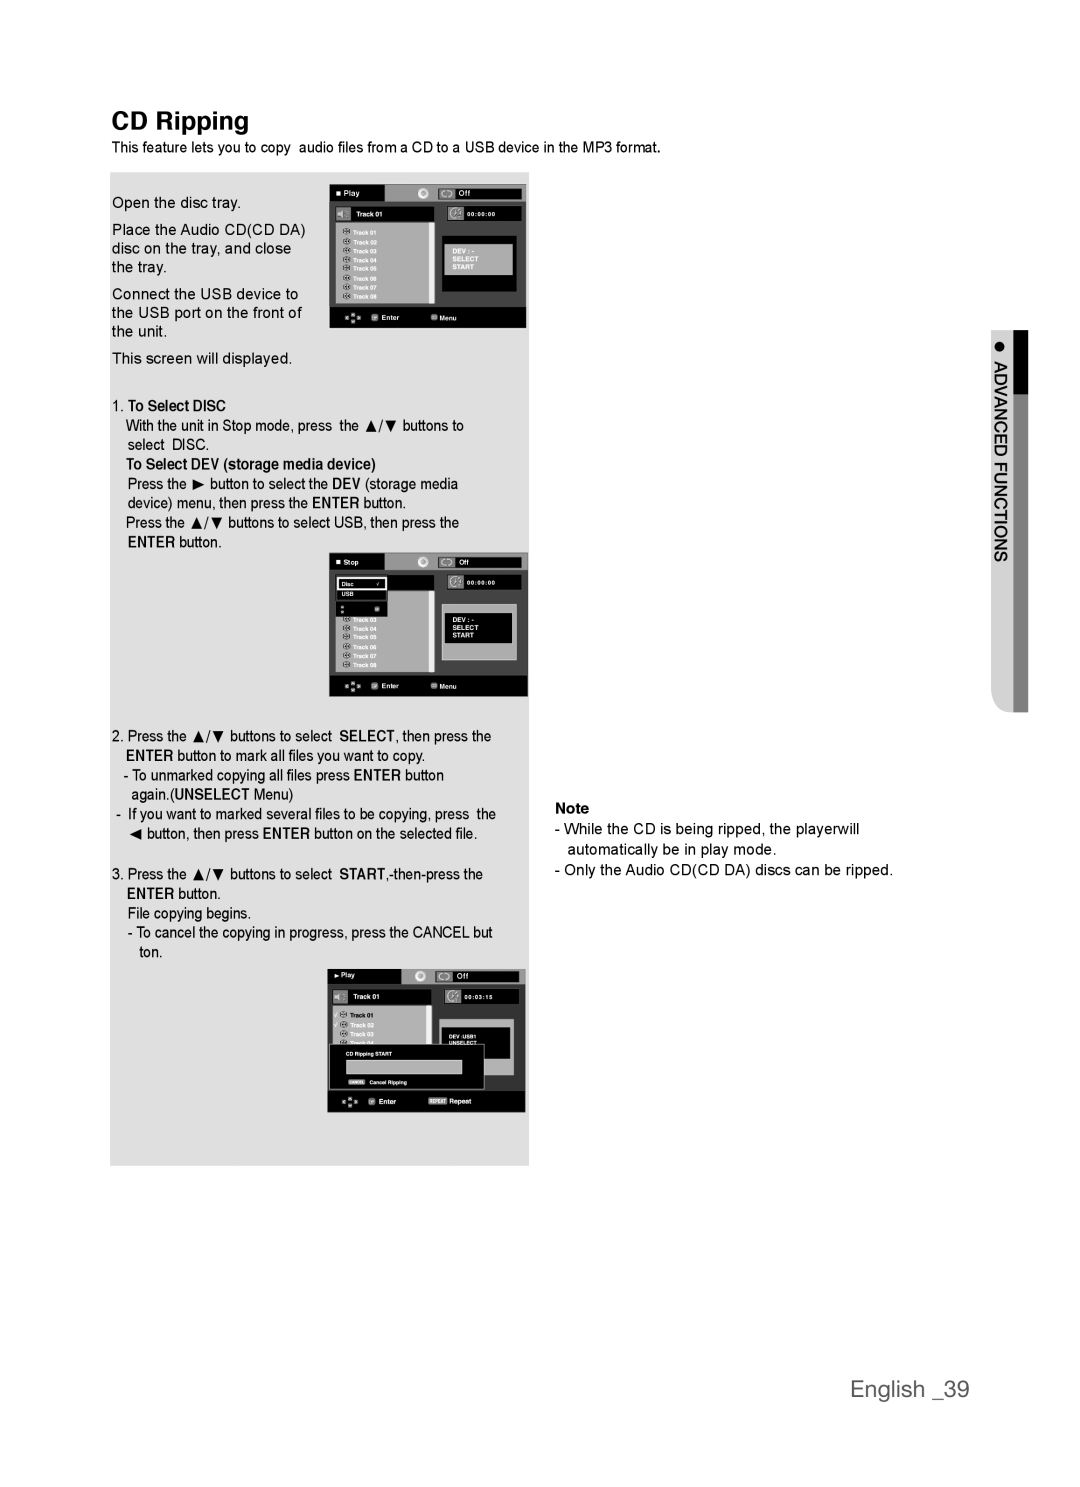 Samsung AK68-01770G, DVD-P390 user manual CD Ripping, English, To Select DISC, To Select DEV storage media device 